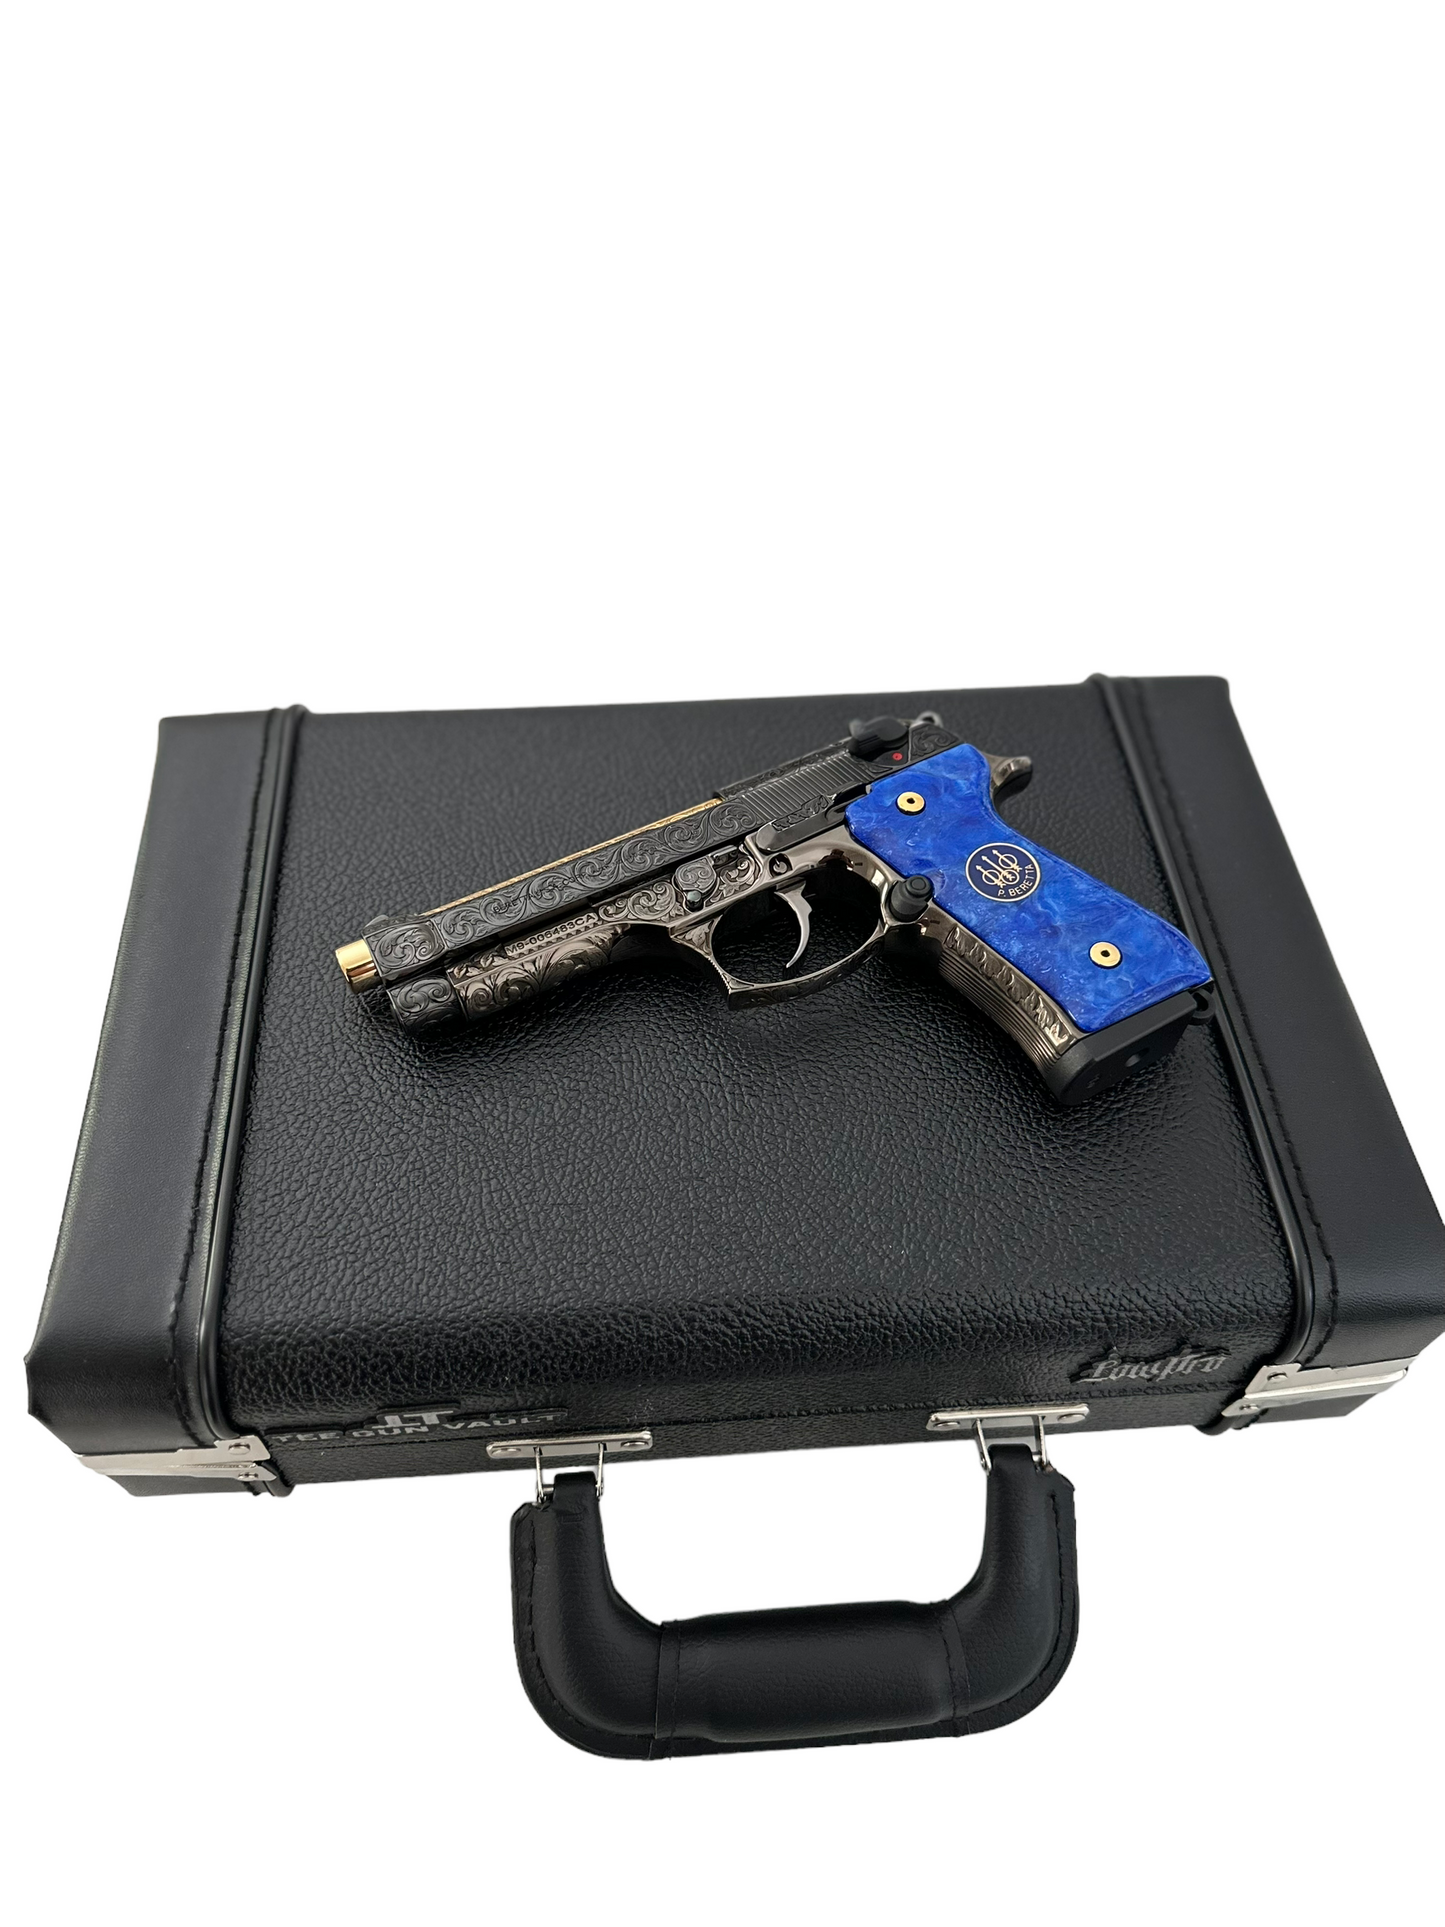 Beretta 92 M9 custom fully engraved black nickel with 24k gold barrel and custom blue grips 9mm (pre-owned)